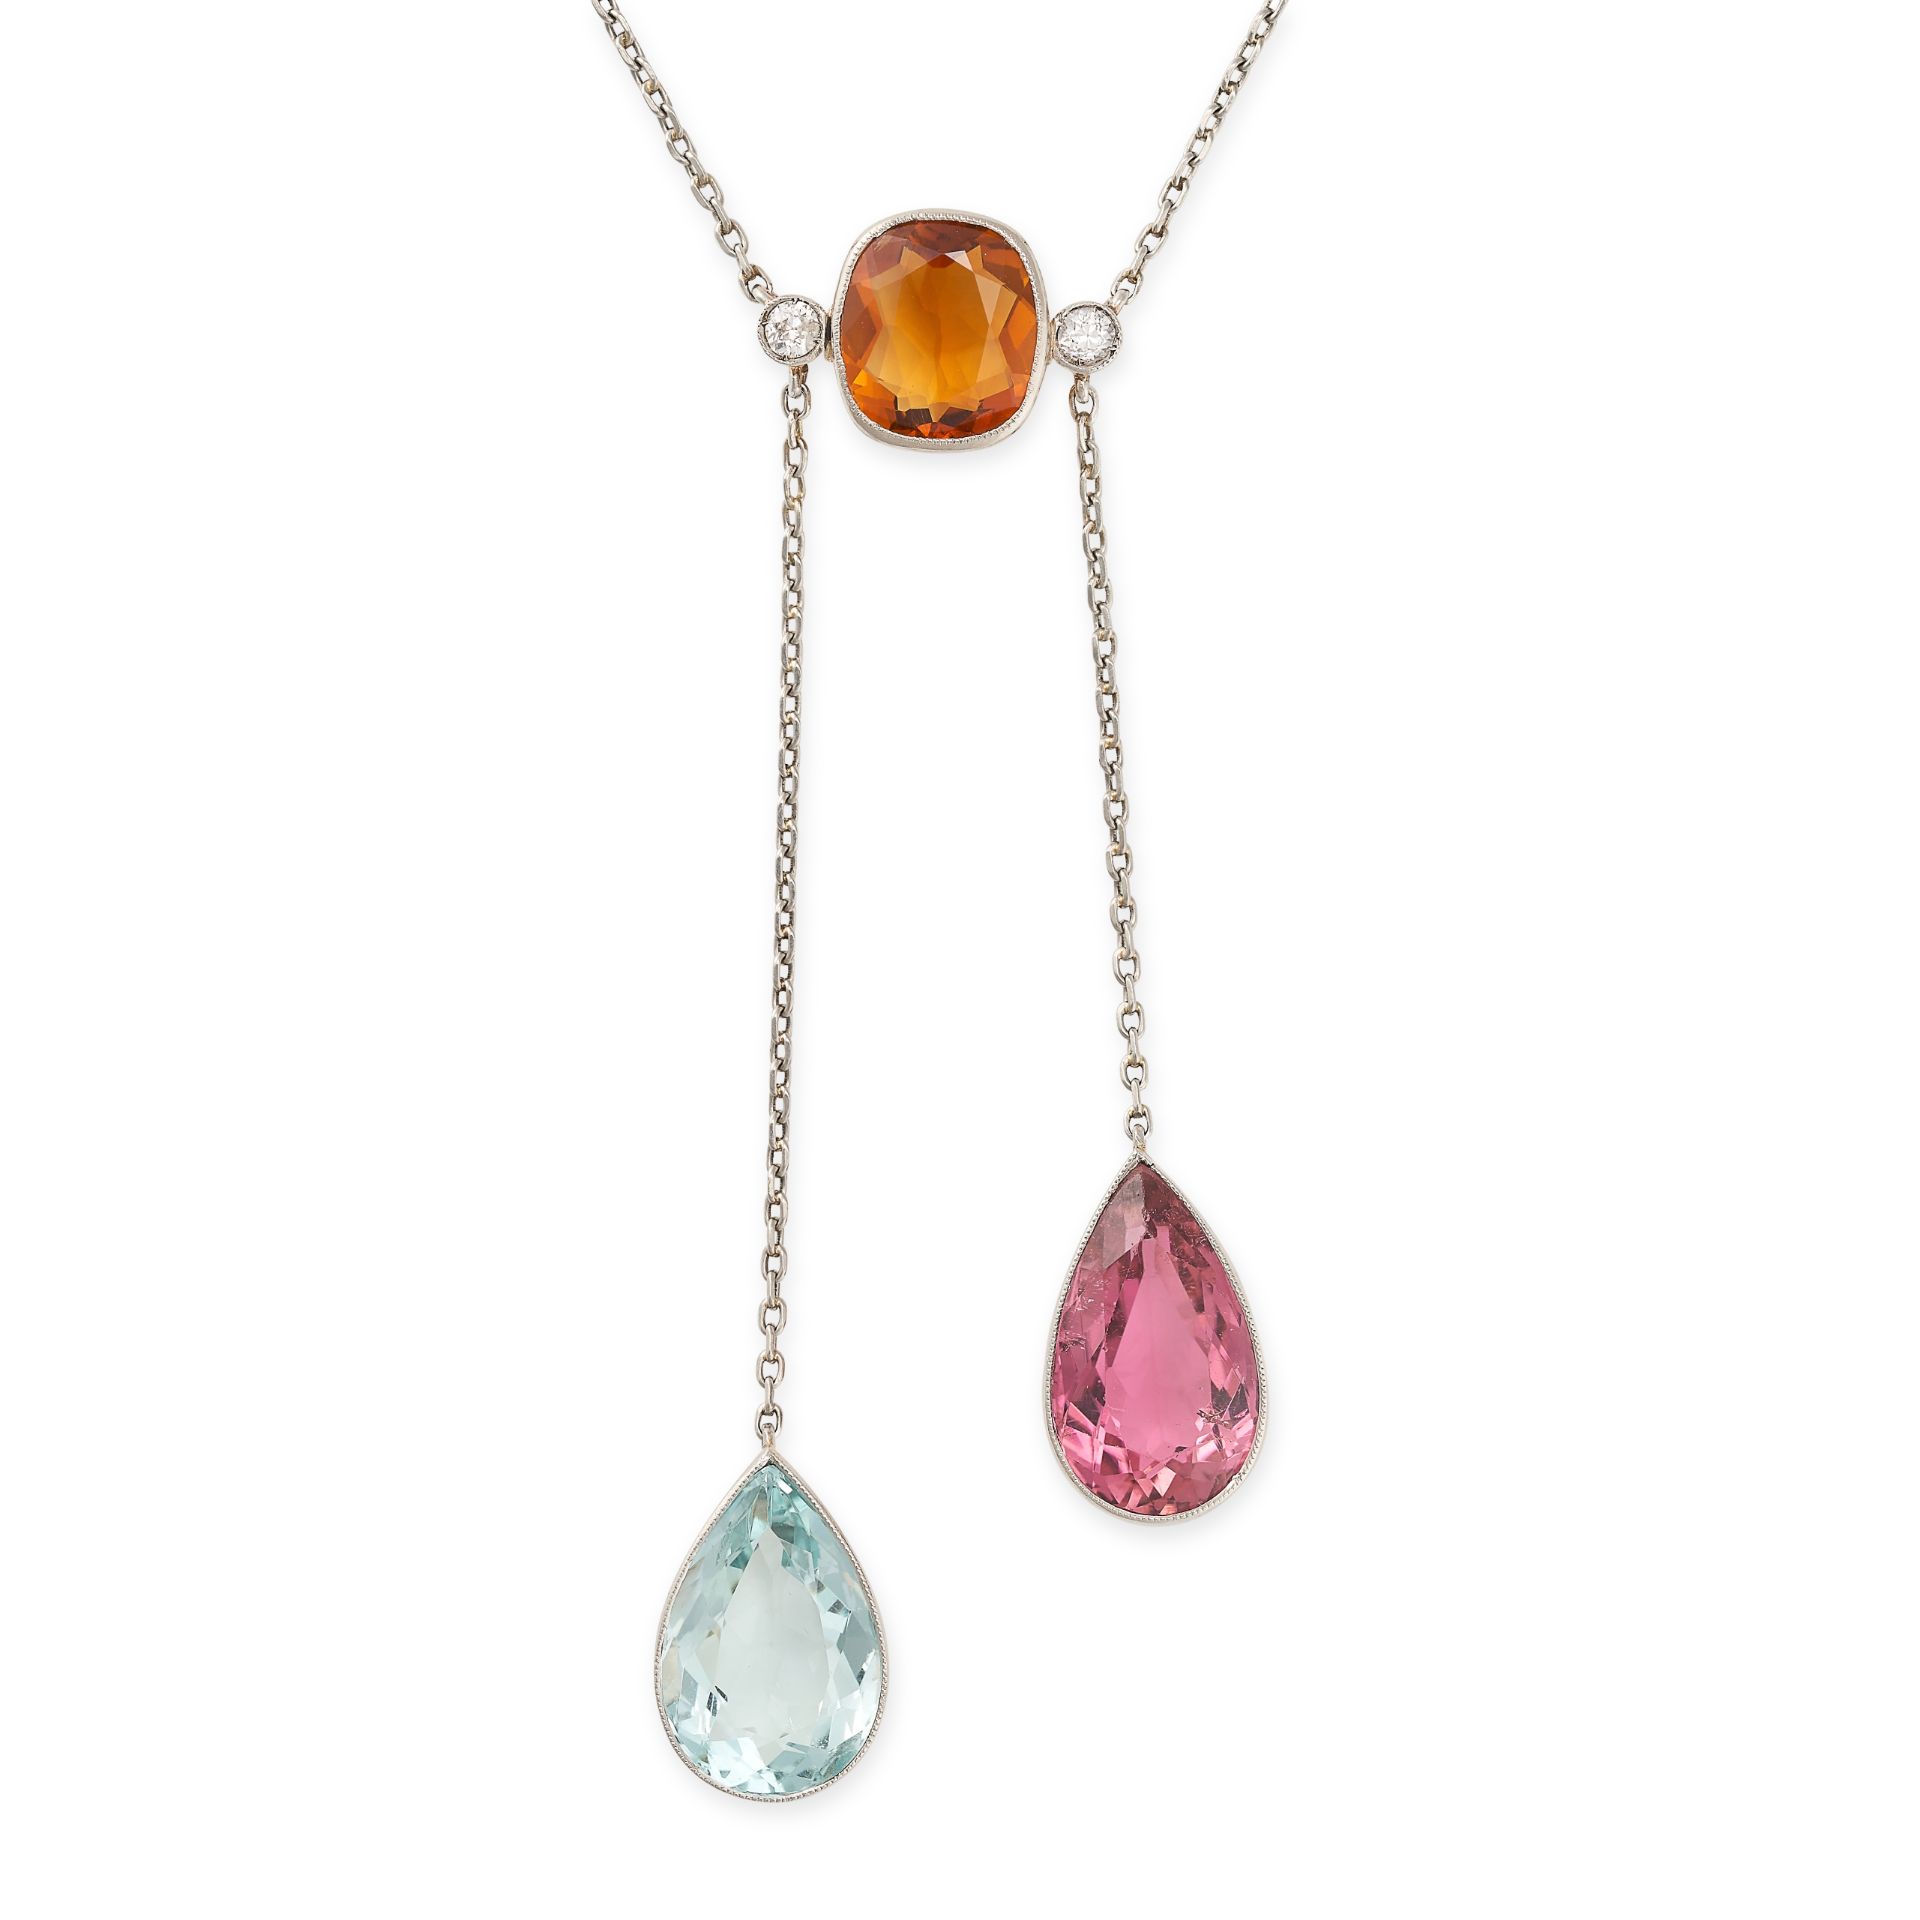 A CITRINE, AQUAMARINE AND PINK TOURMALINE NEGLIGEE NECKLACE in platinum and 18ct yellow gold, com...